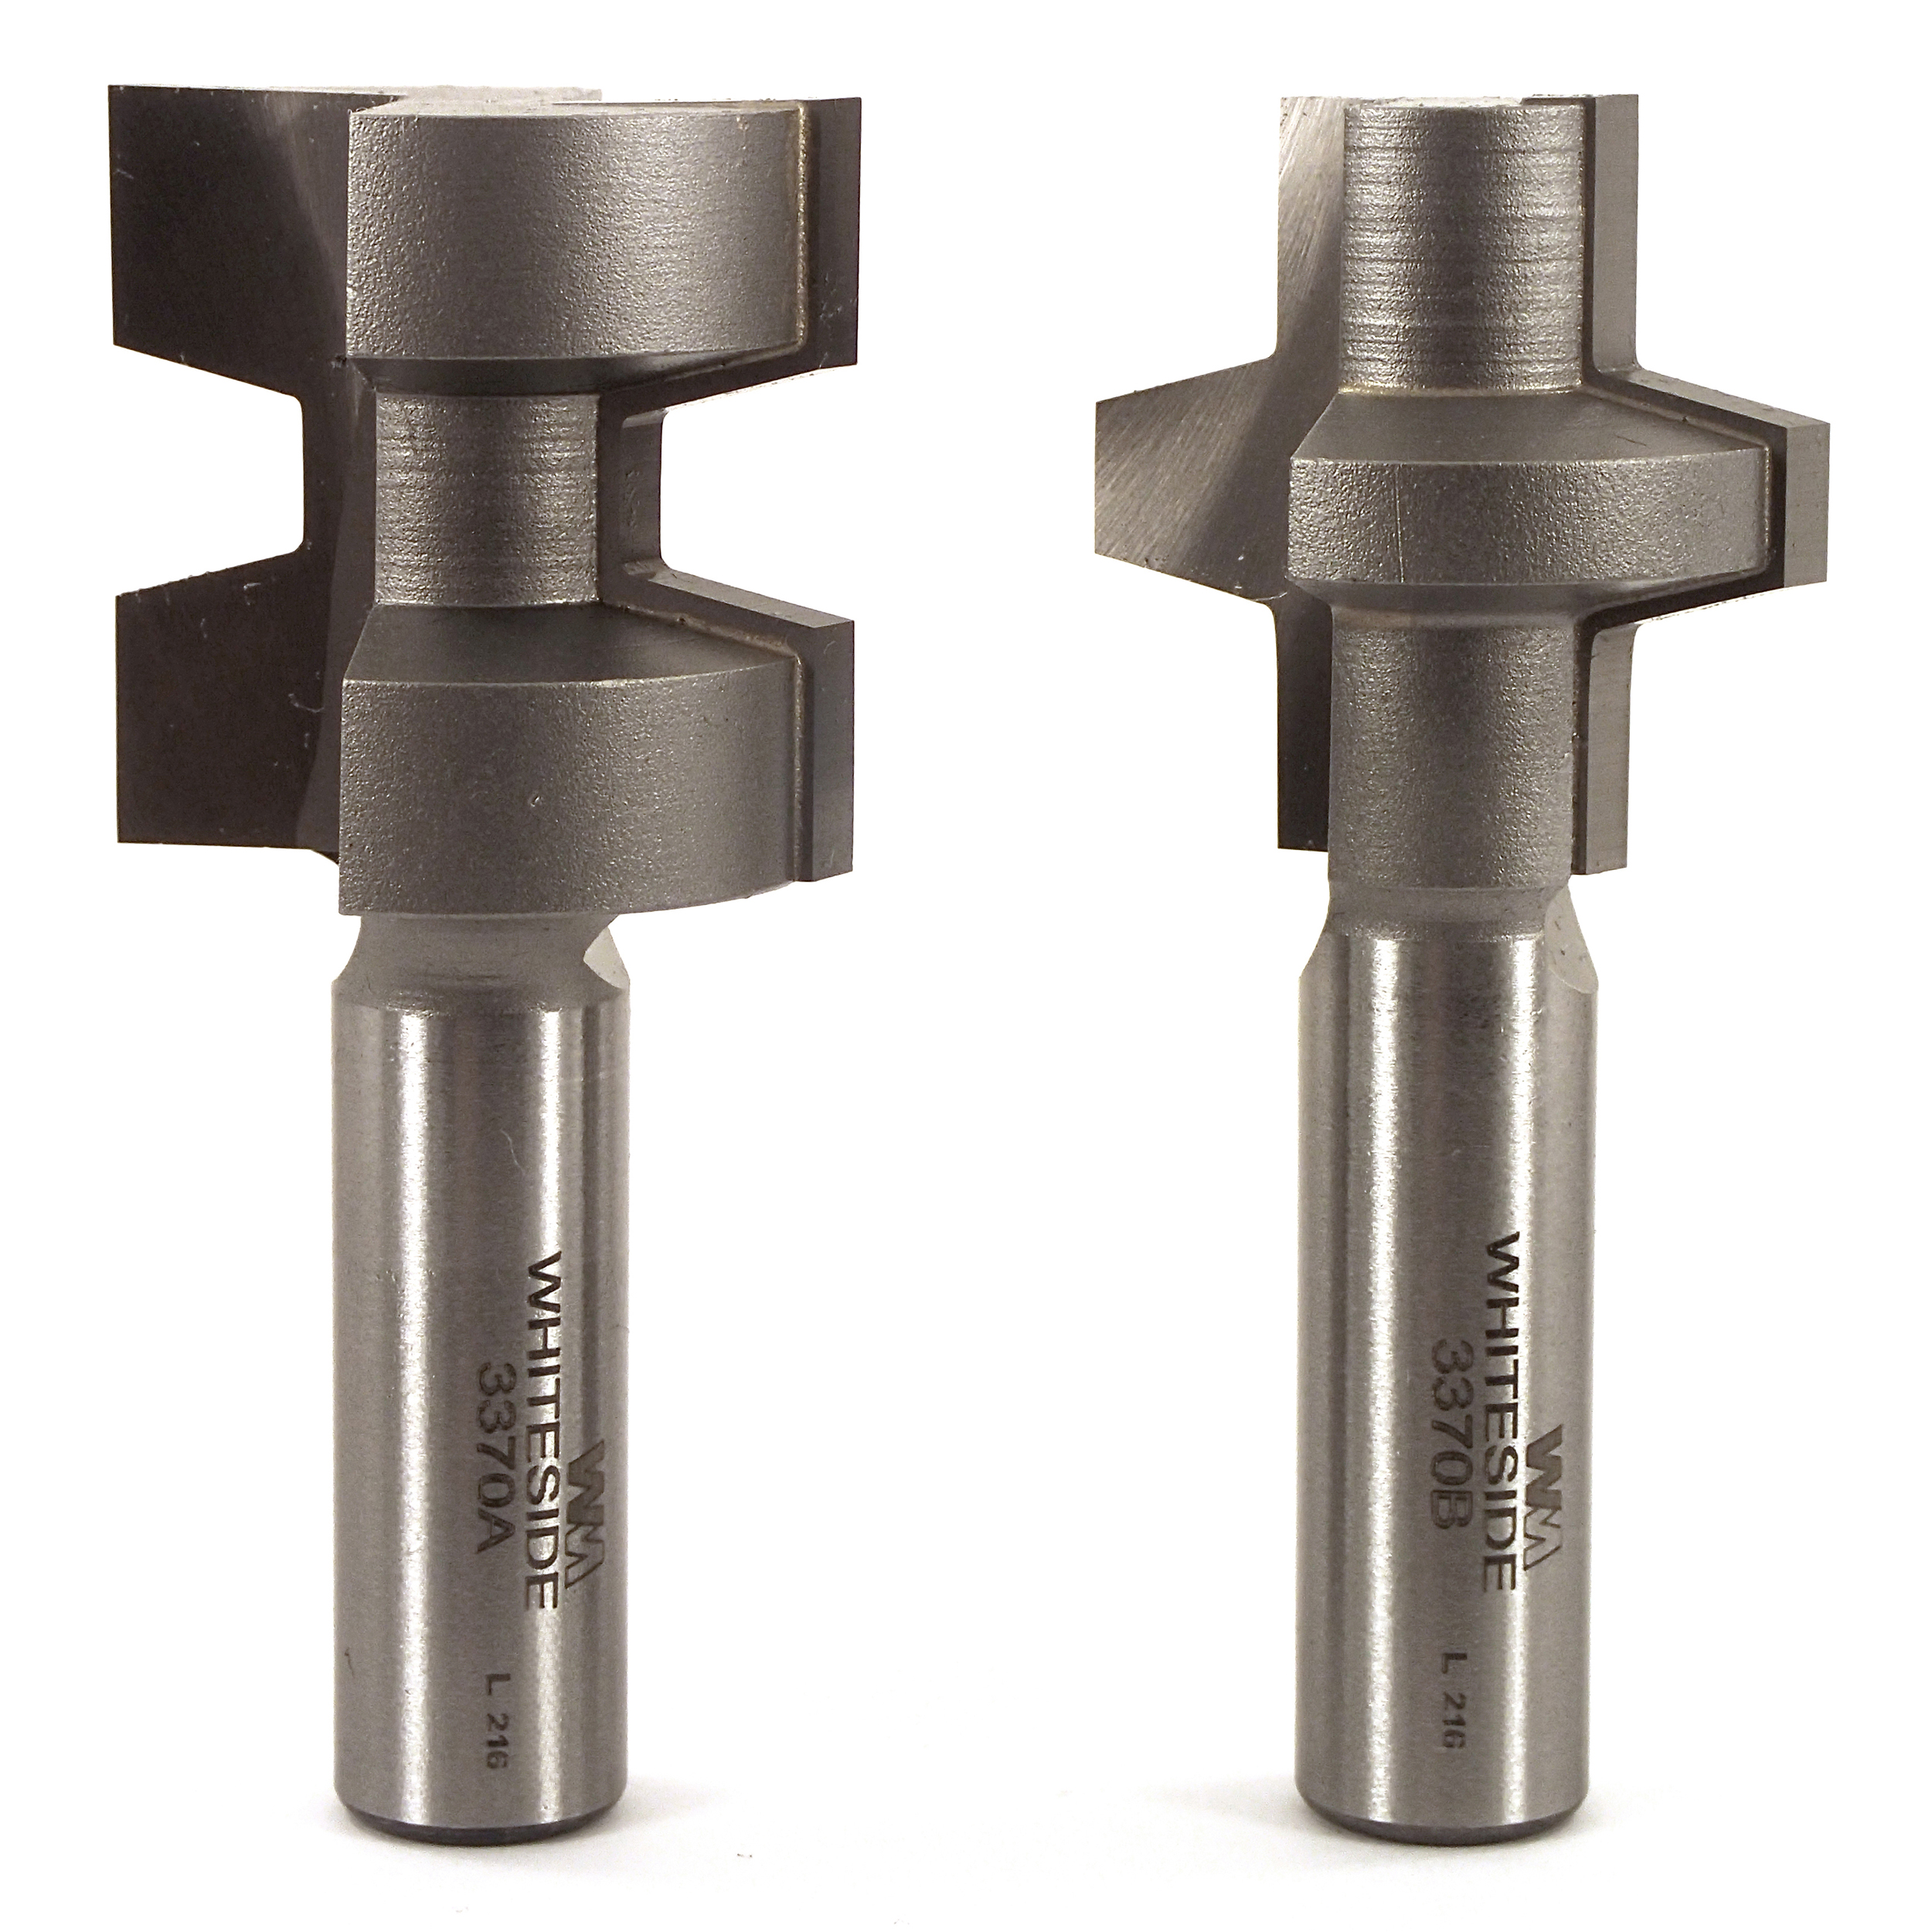 3370 Wedge Tongue And Groove (2) Router Bit 1-1/4" D X 1-1/4" Cl X 2-7/8" Ol